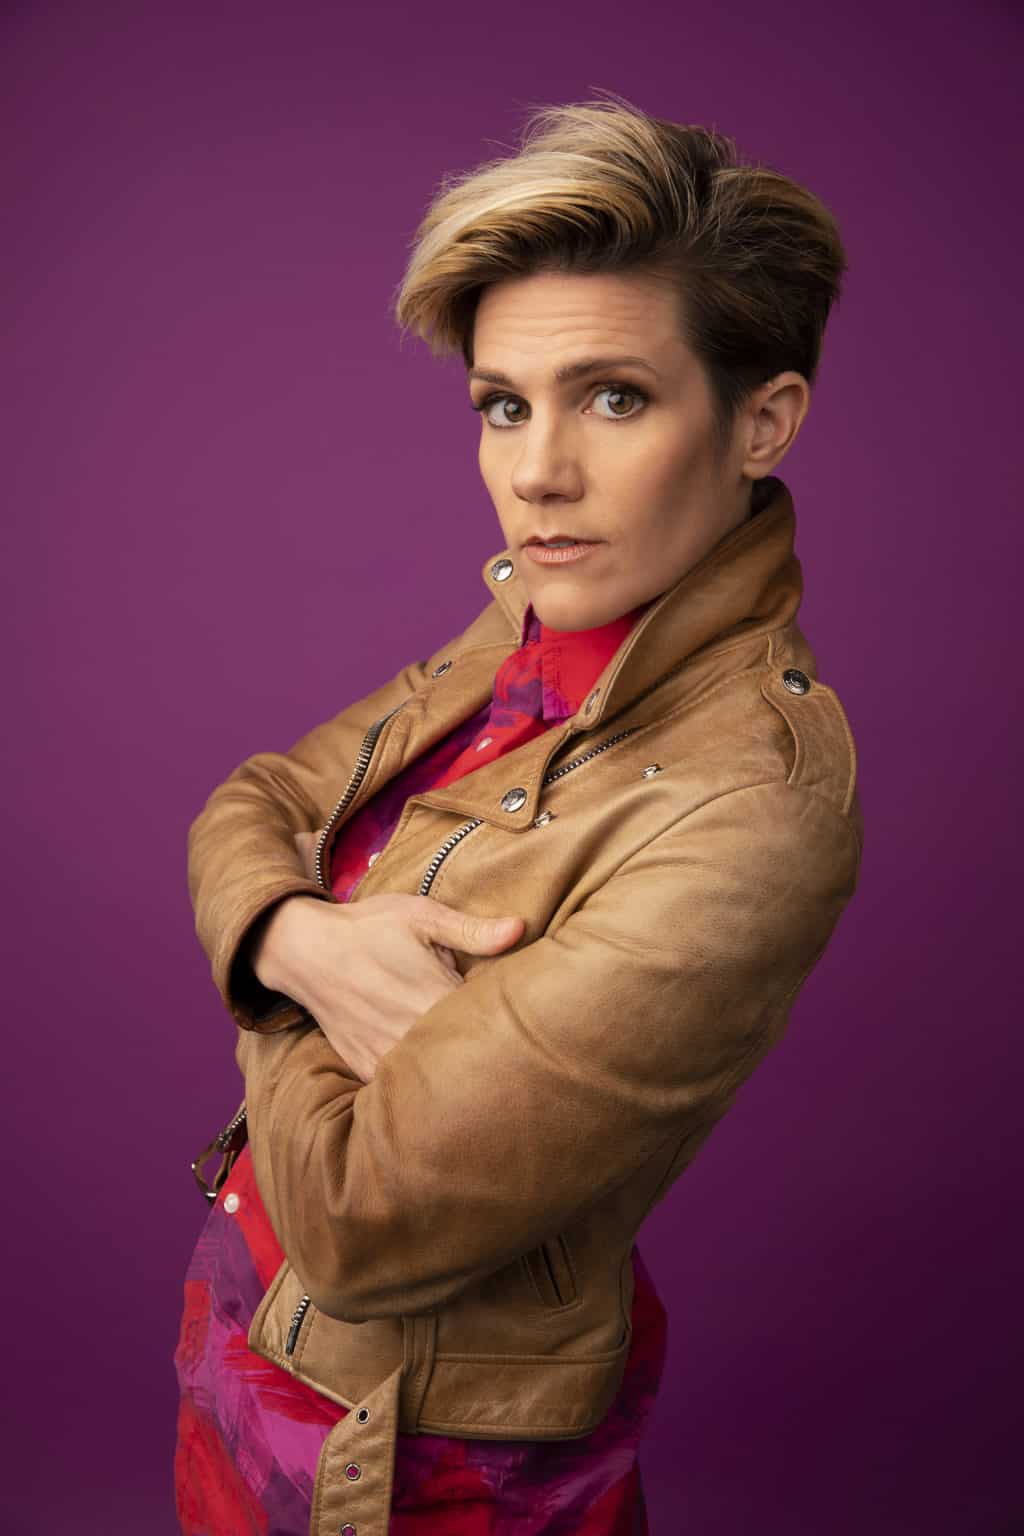 How rich is Cameron Esposito?